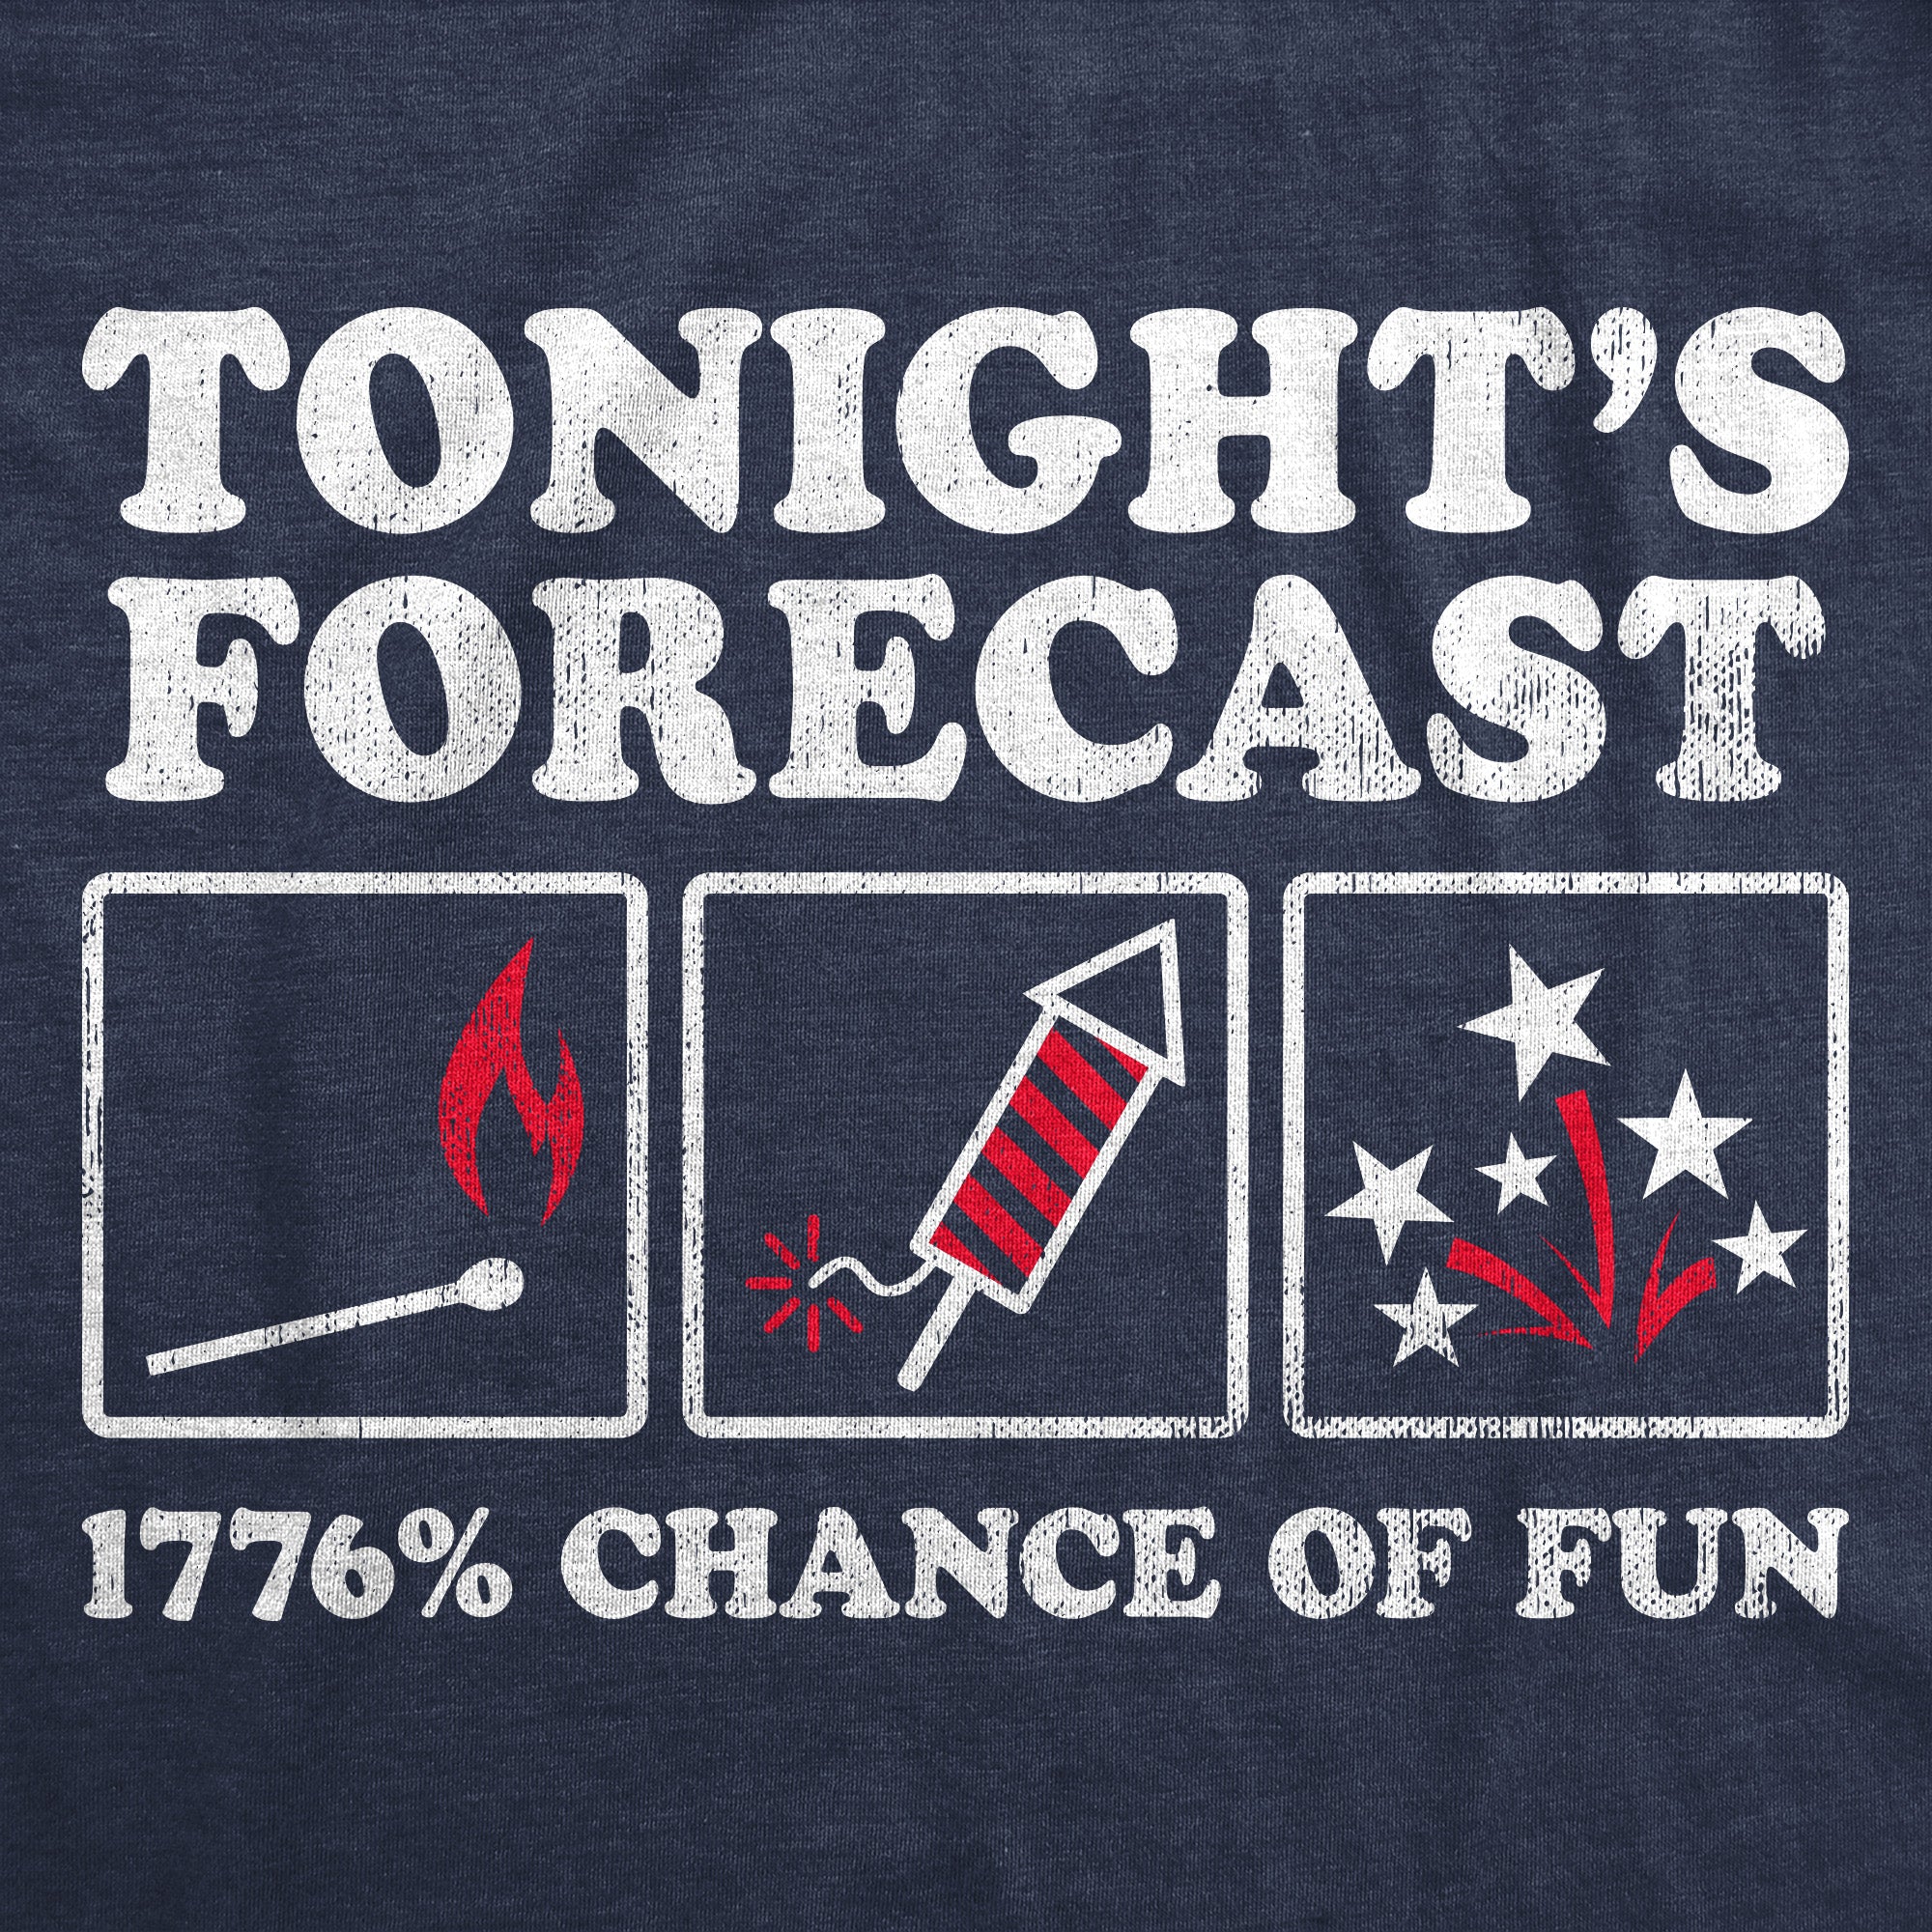 Funny Heather Navy - FORECAST Tonights Forecast 1776 Percent Chance Of Fun Mens T Shirt Nerdy Fourth of July Sarcastic Tee